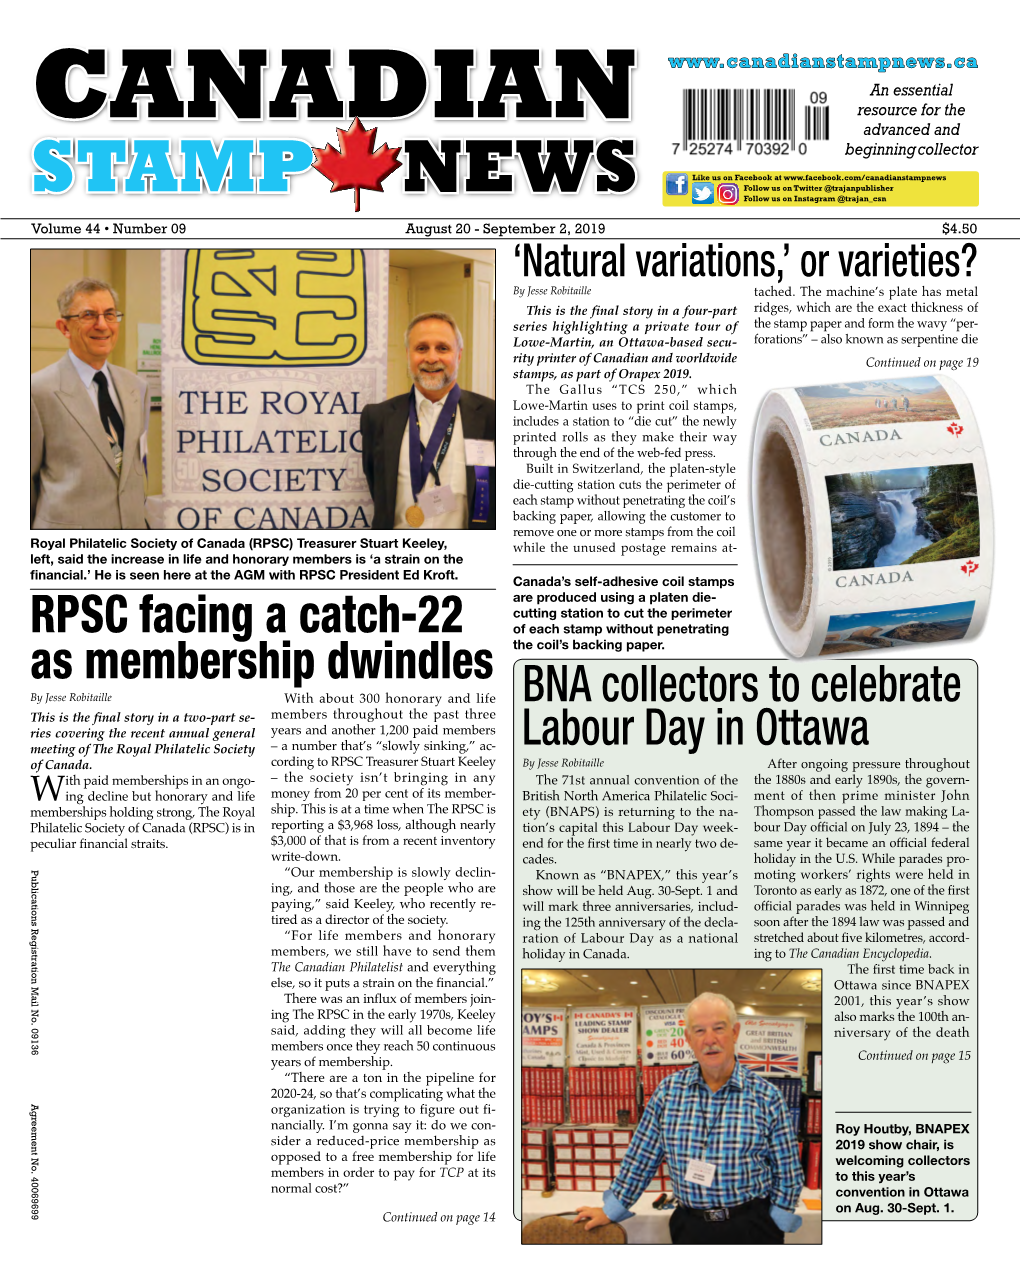 Canadianstampnews.Ca an Essential Resource for the CANADIAN Advanced and Beginning Collector